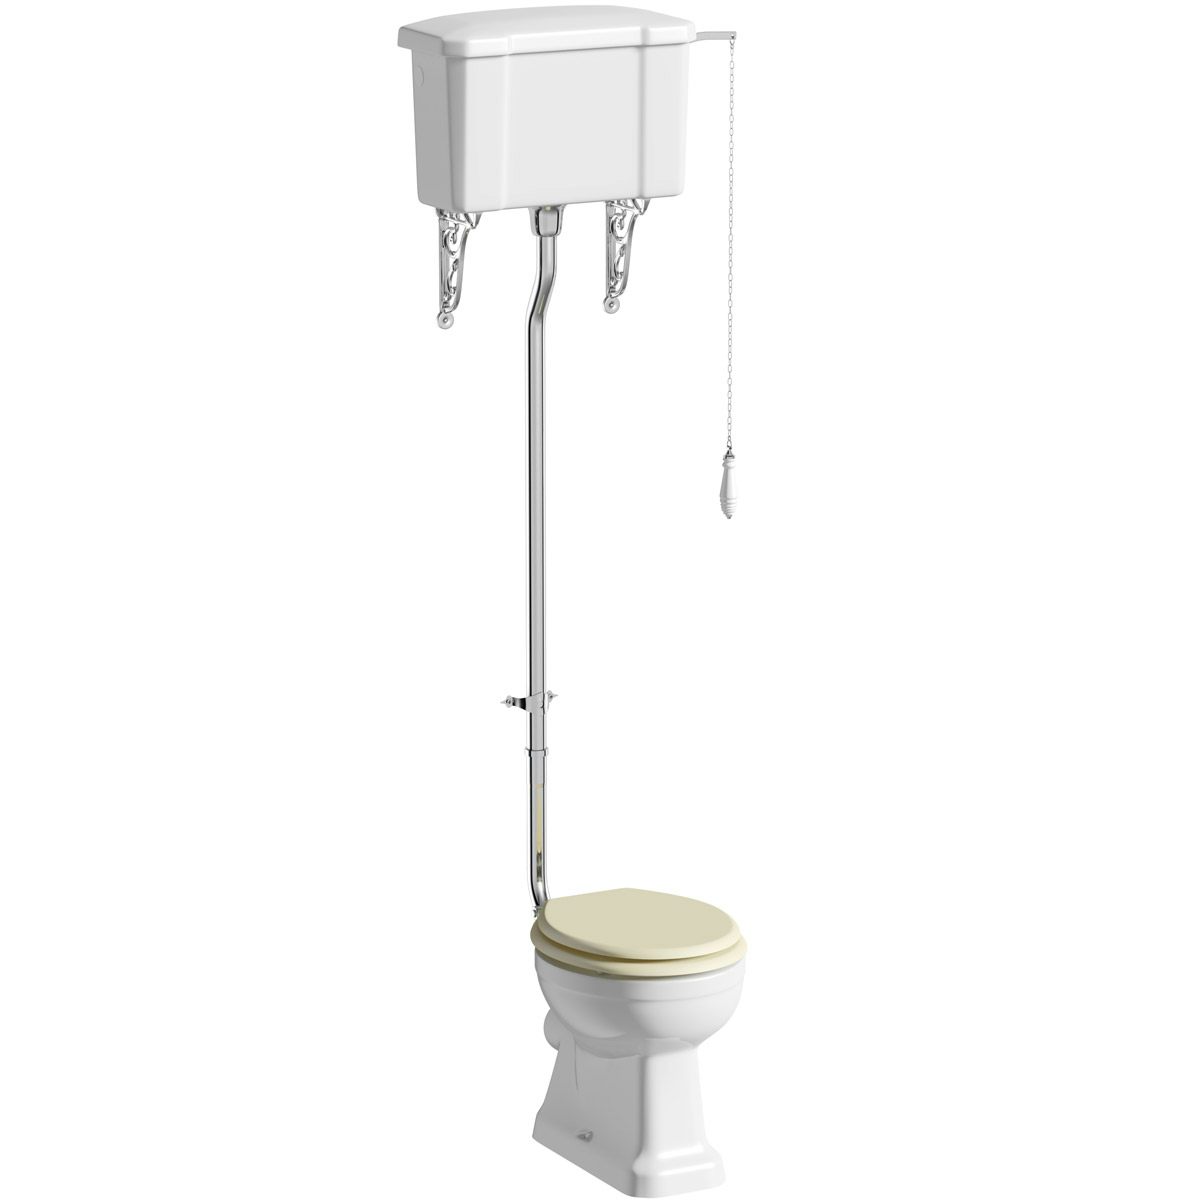 The Bath Co. Camberley high level toilet with ivory soft close seat